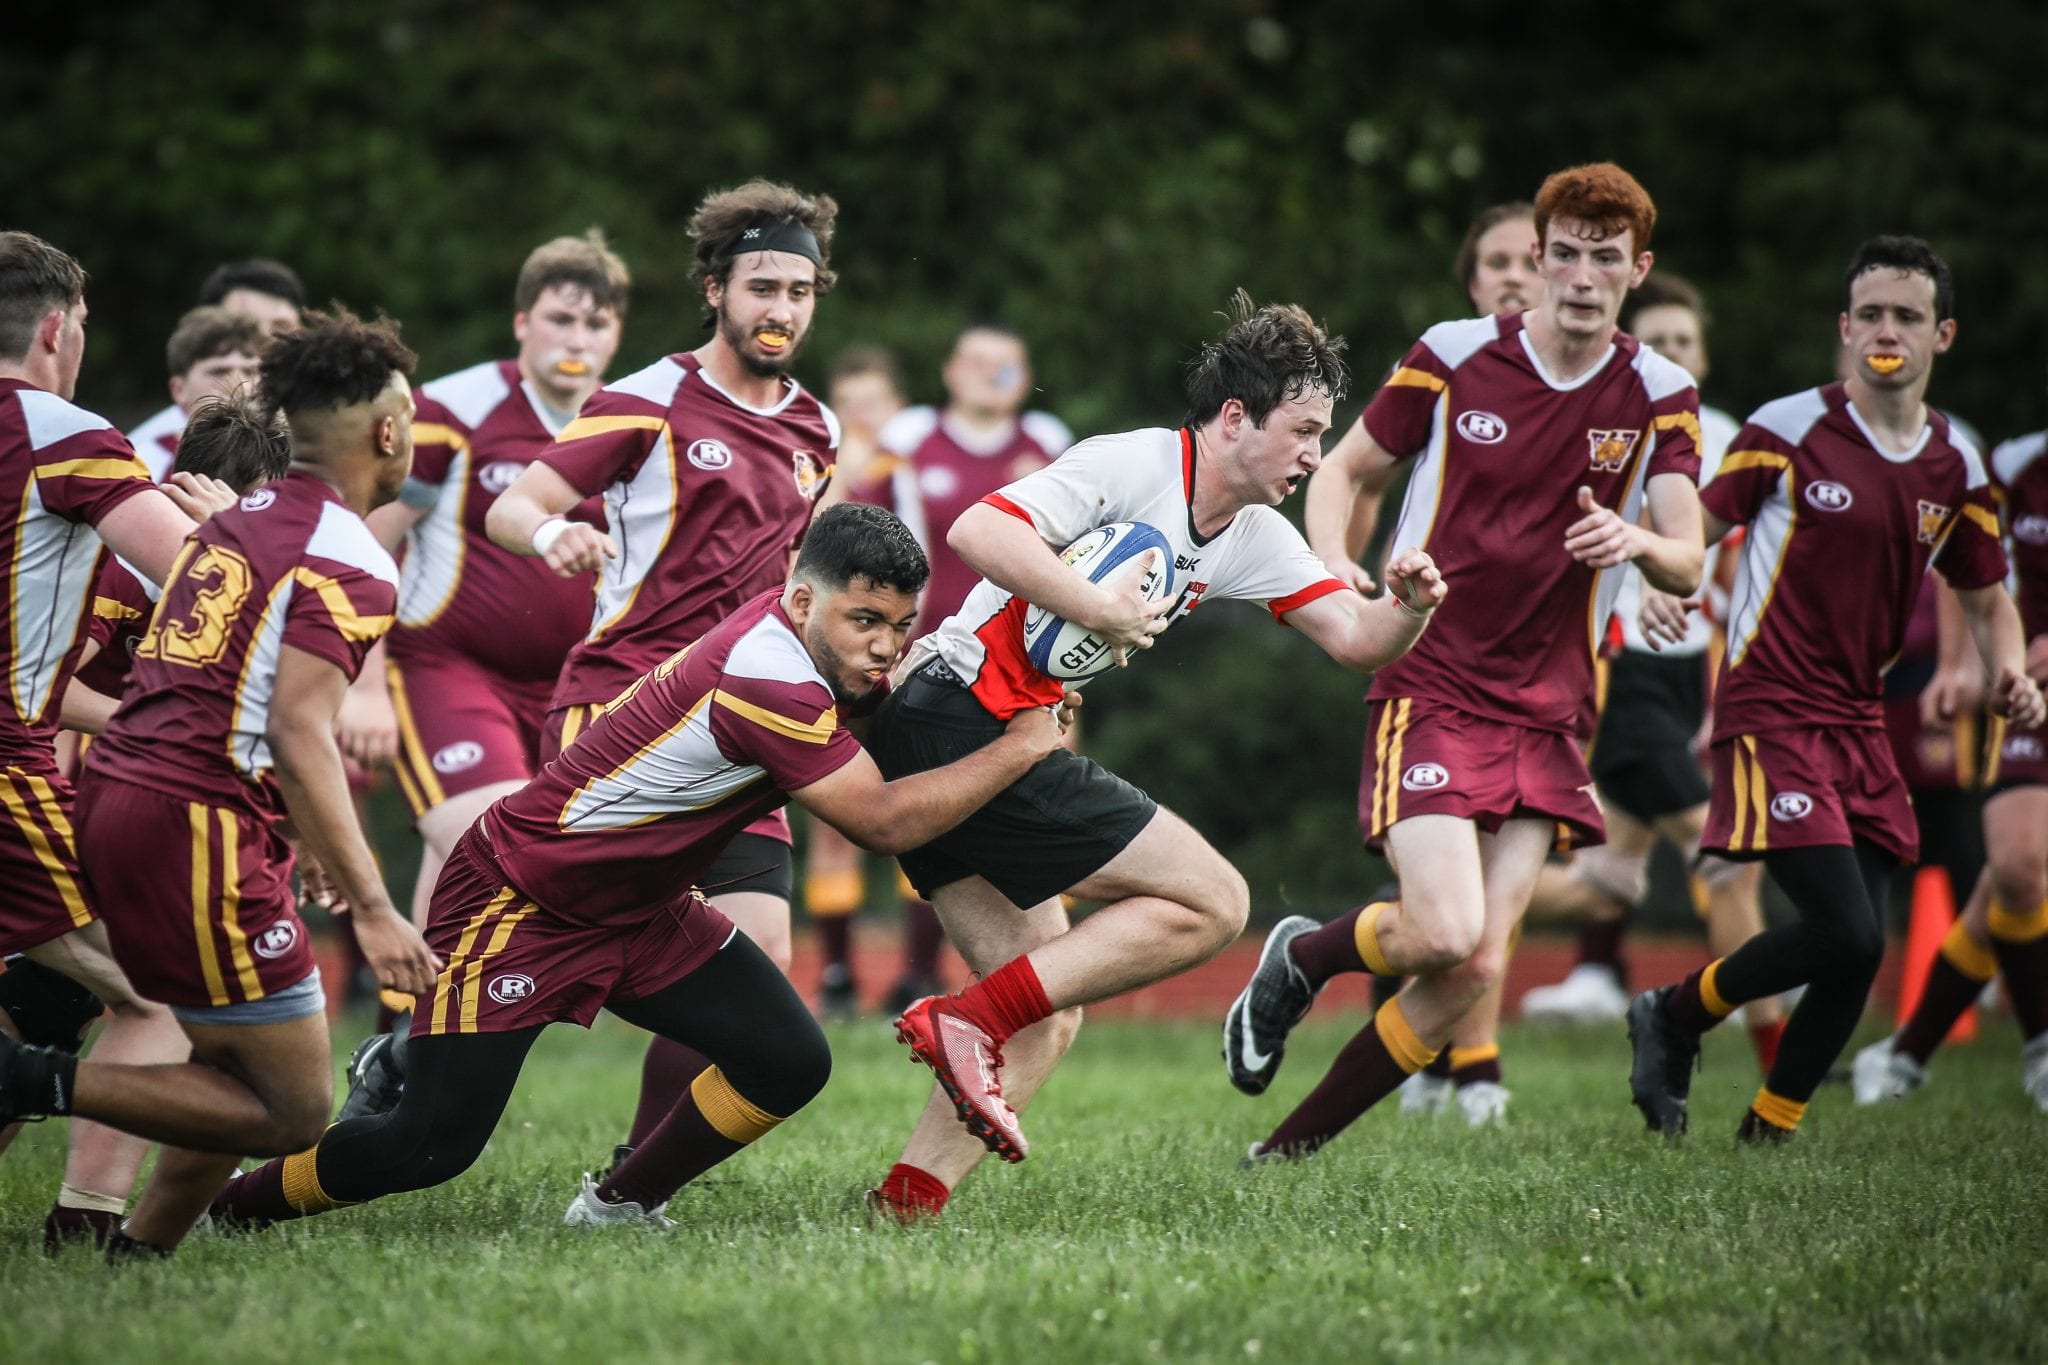 Weymouth High boys rugby bests Hanover in Division 2 final